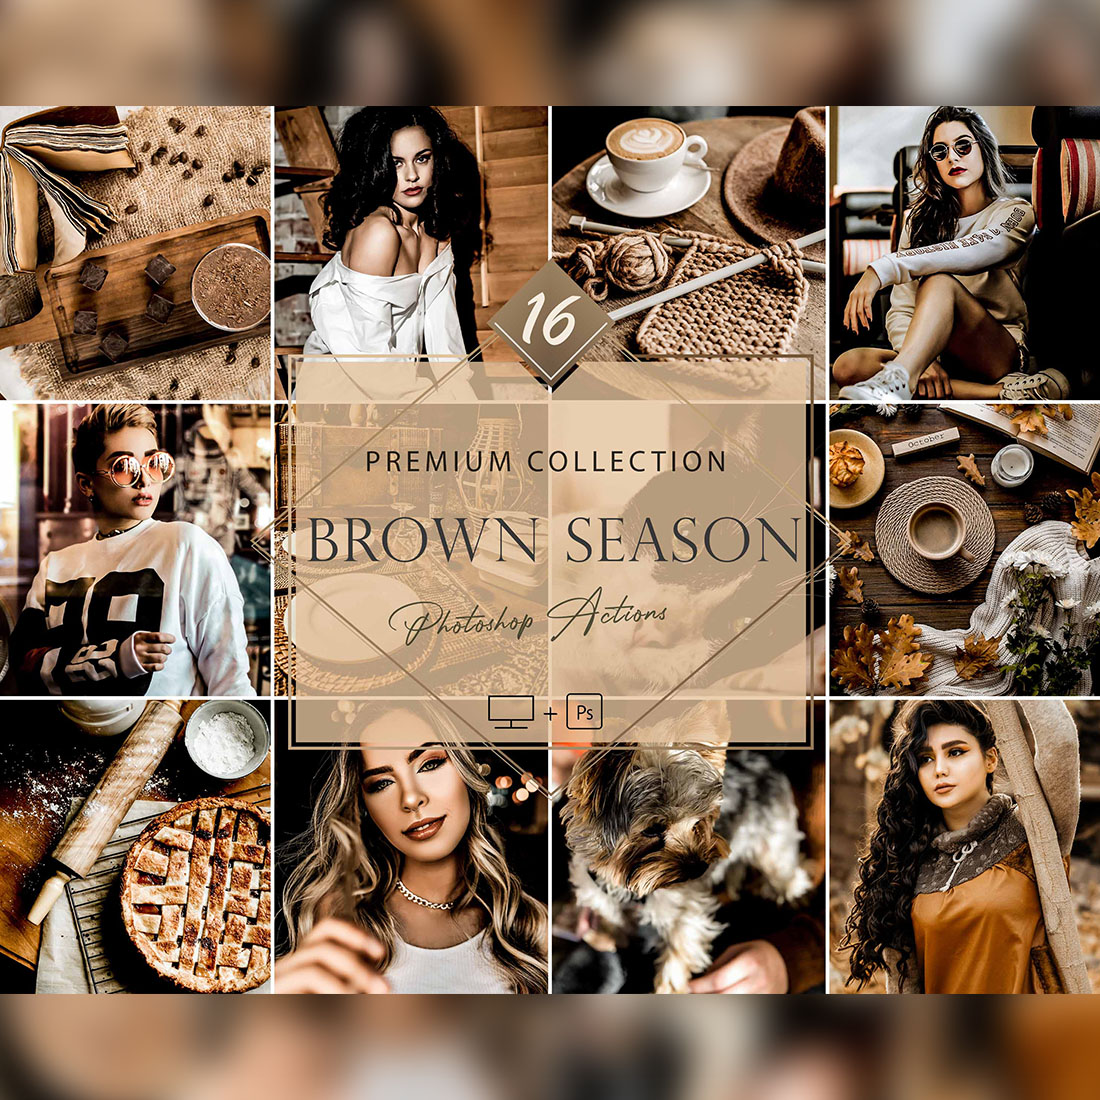 16 Photoshop Actions, Brown Season Ps Action, Moody ACR Preset, Fall Filter, Lifestyle Theme For Instagram, Dark Presets, Warm portrait cover image.